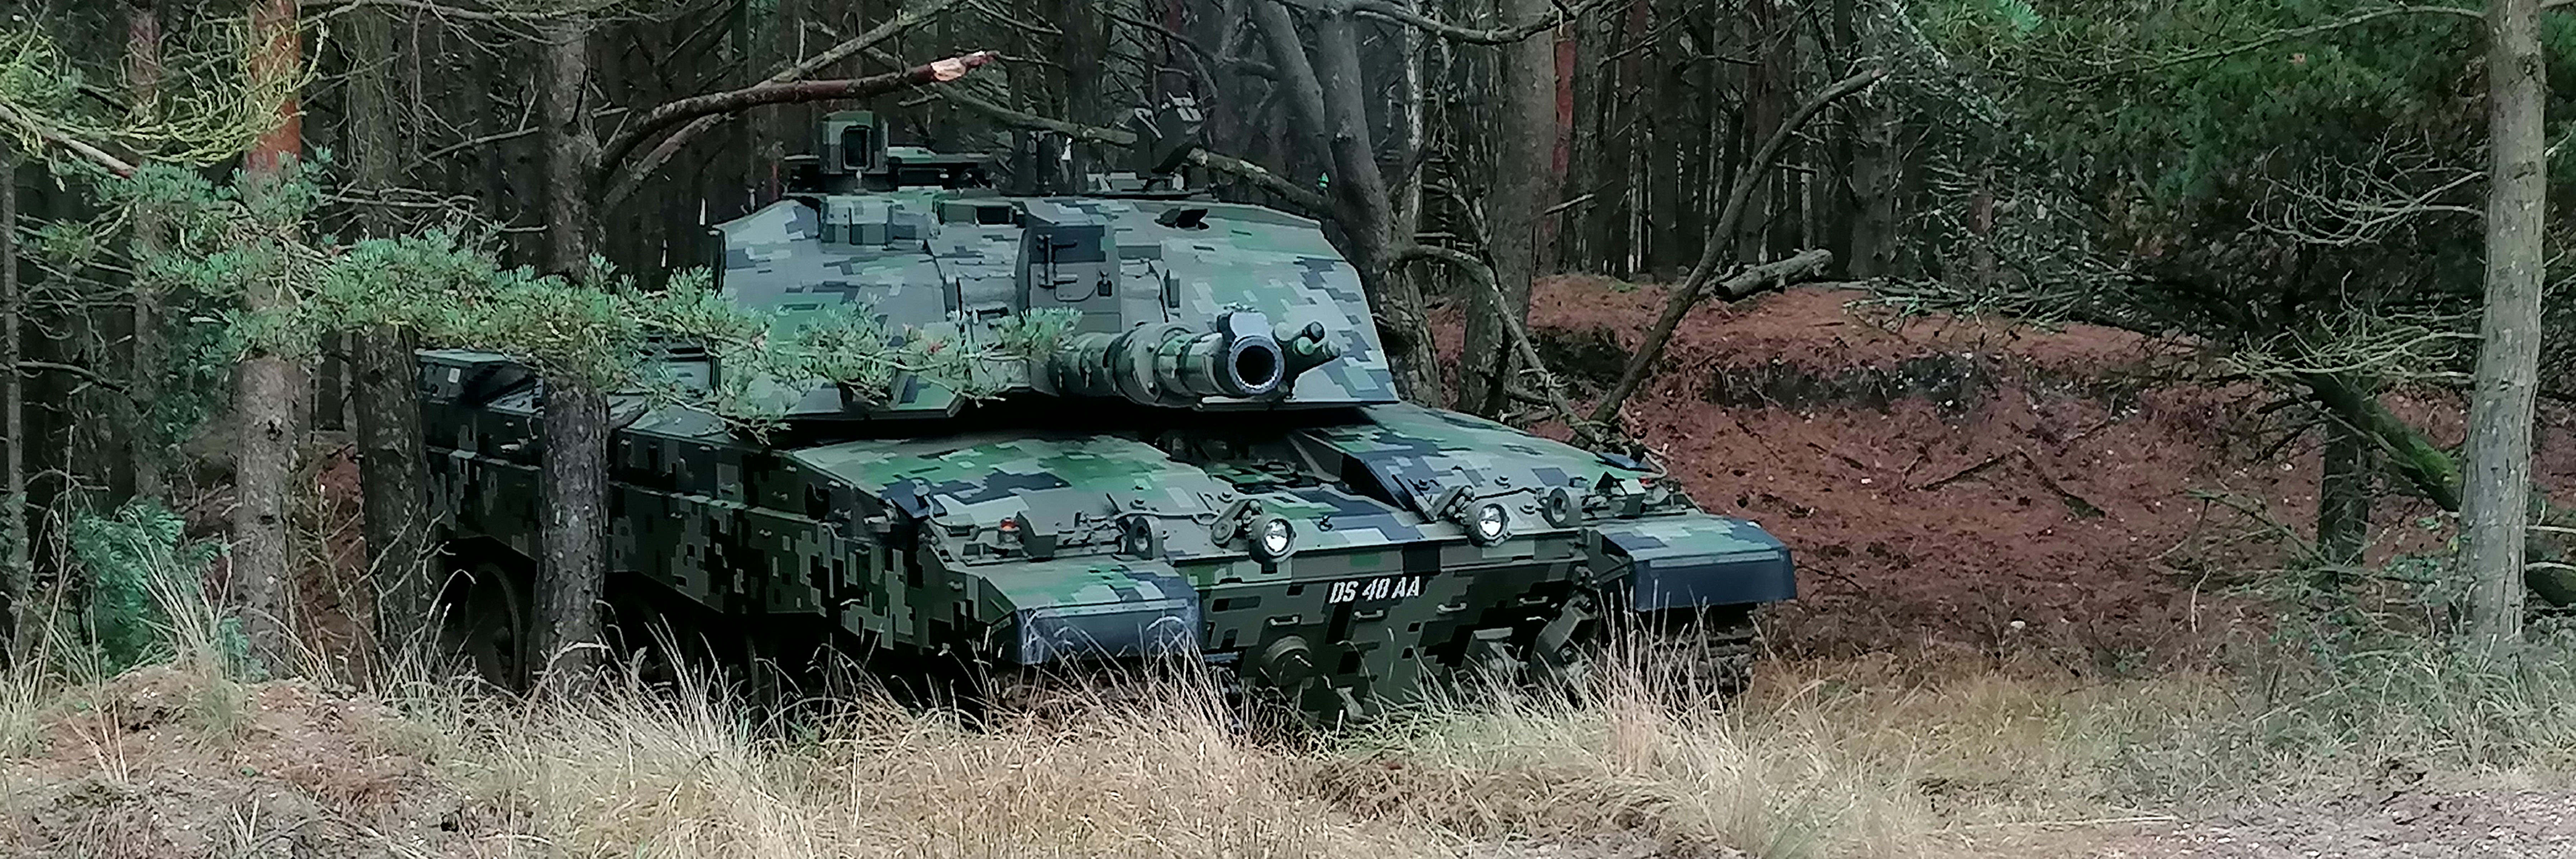 Challenger gets a digital upgrade, with a new digital camouflage paint scheme, seen here on trails at Bovington Training areas in Dorset in the later part of 2020